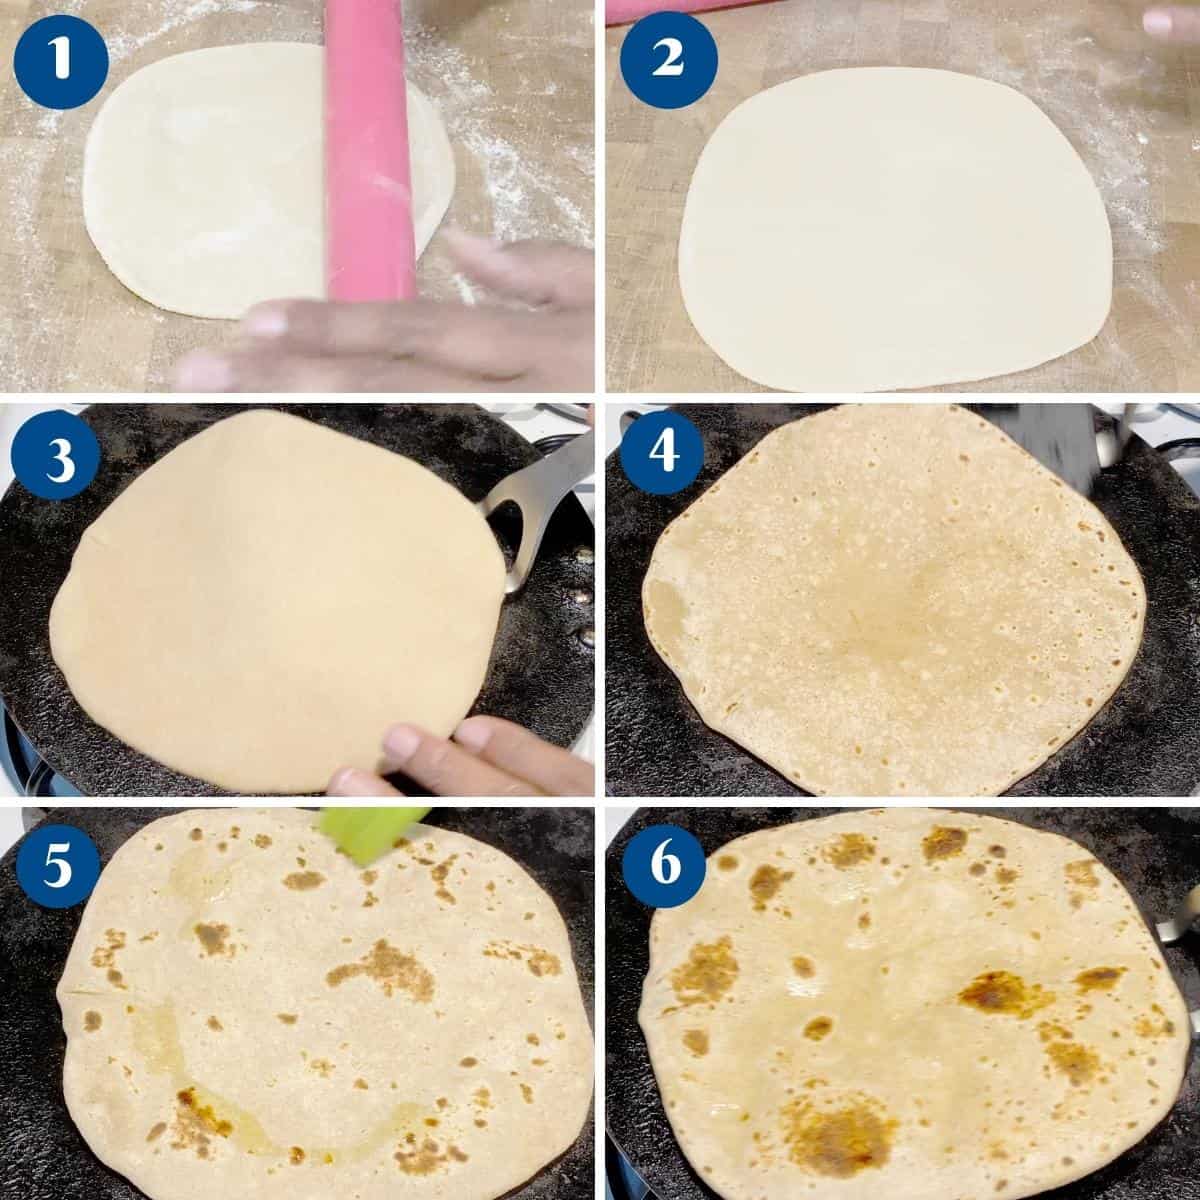 Progress pictures making Indian flatbread chapati.